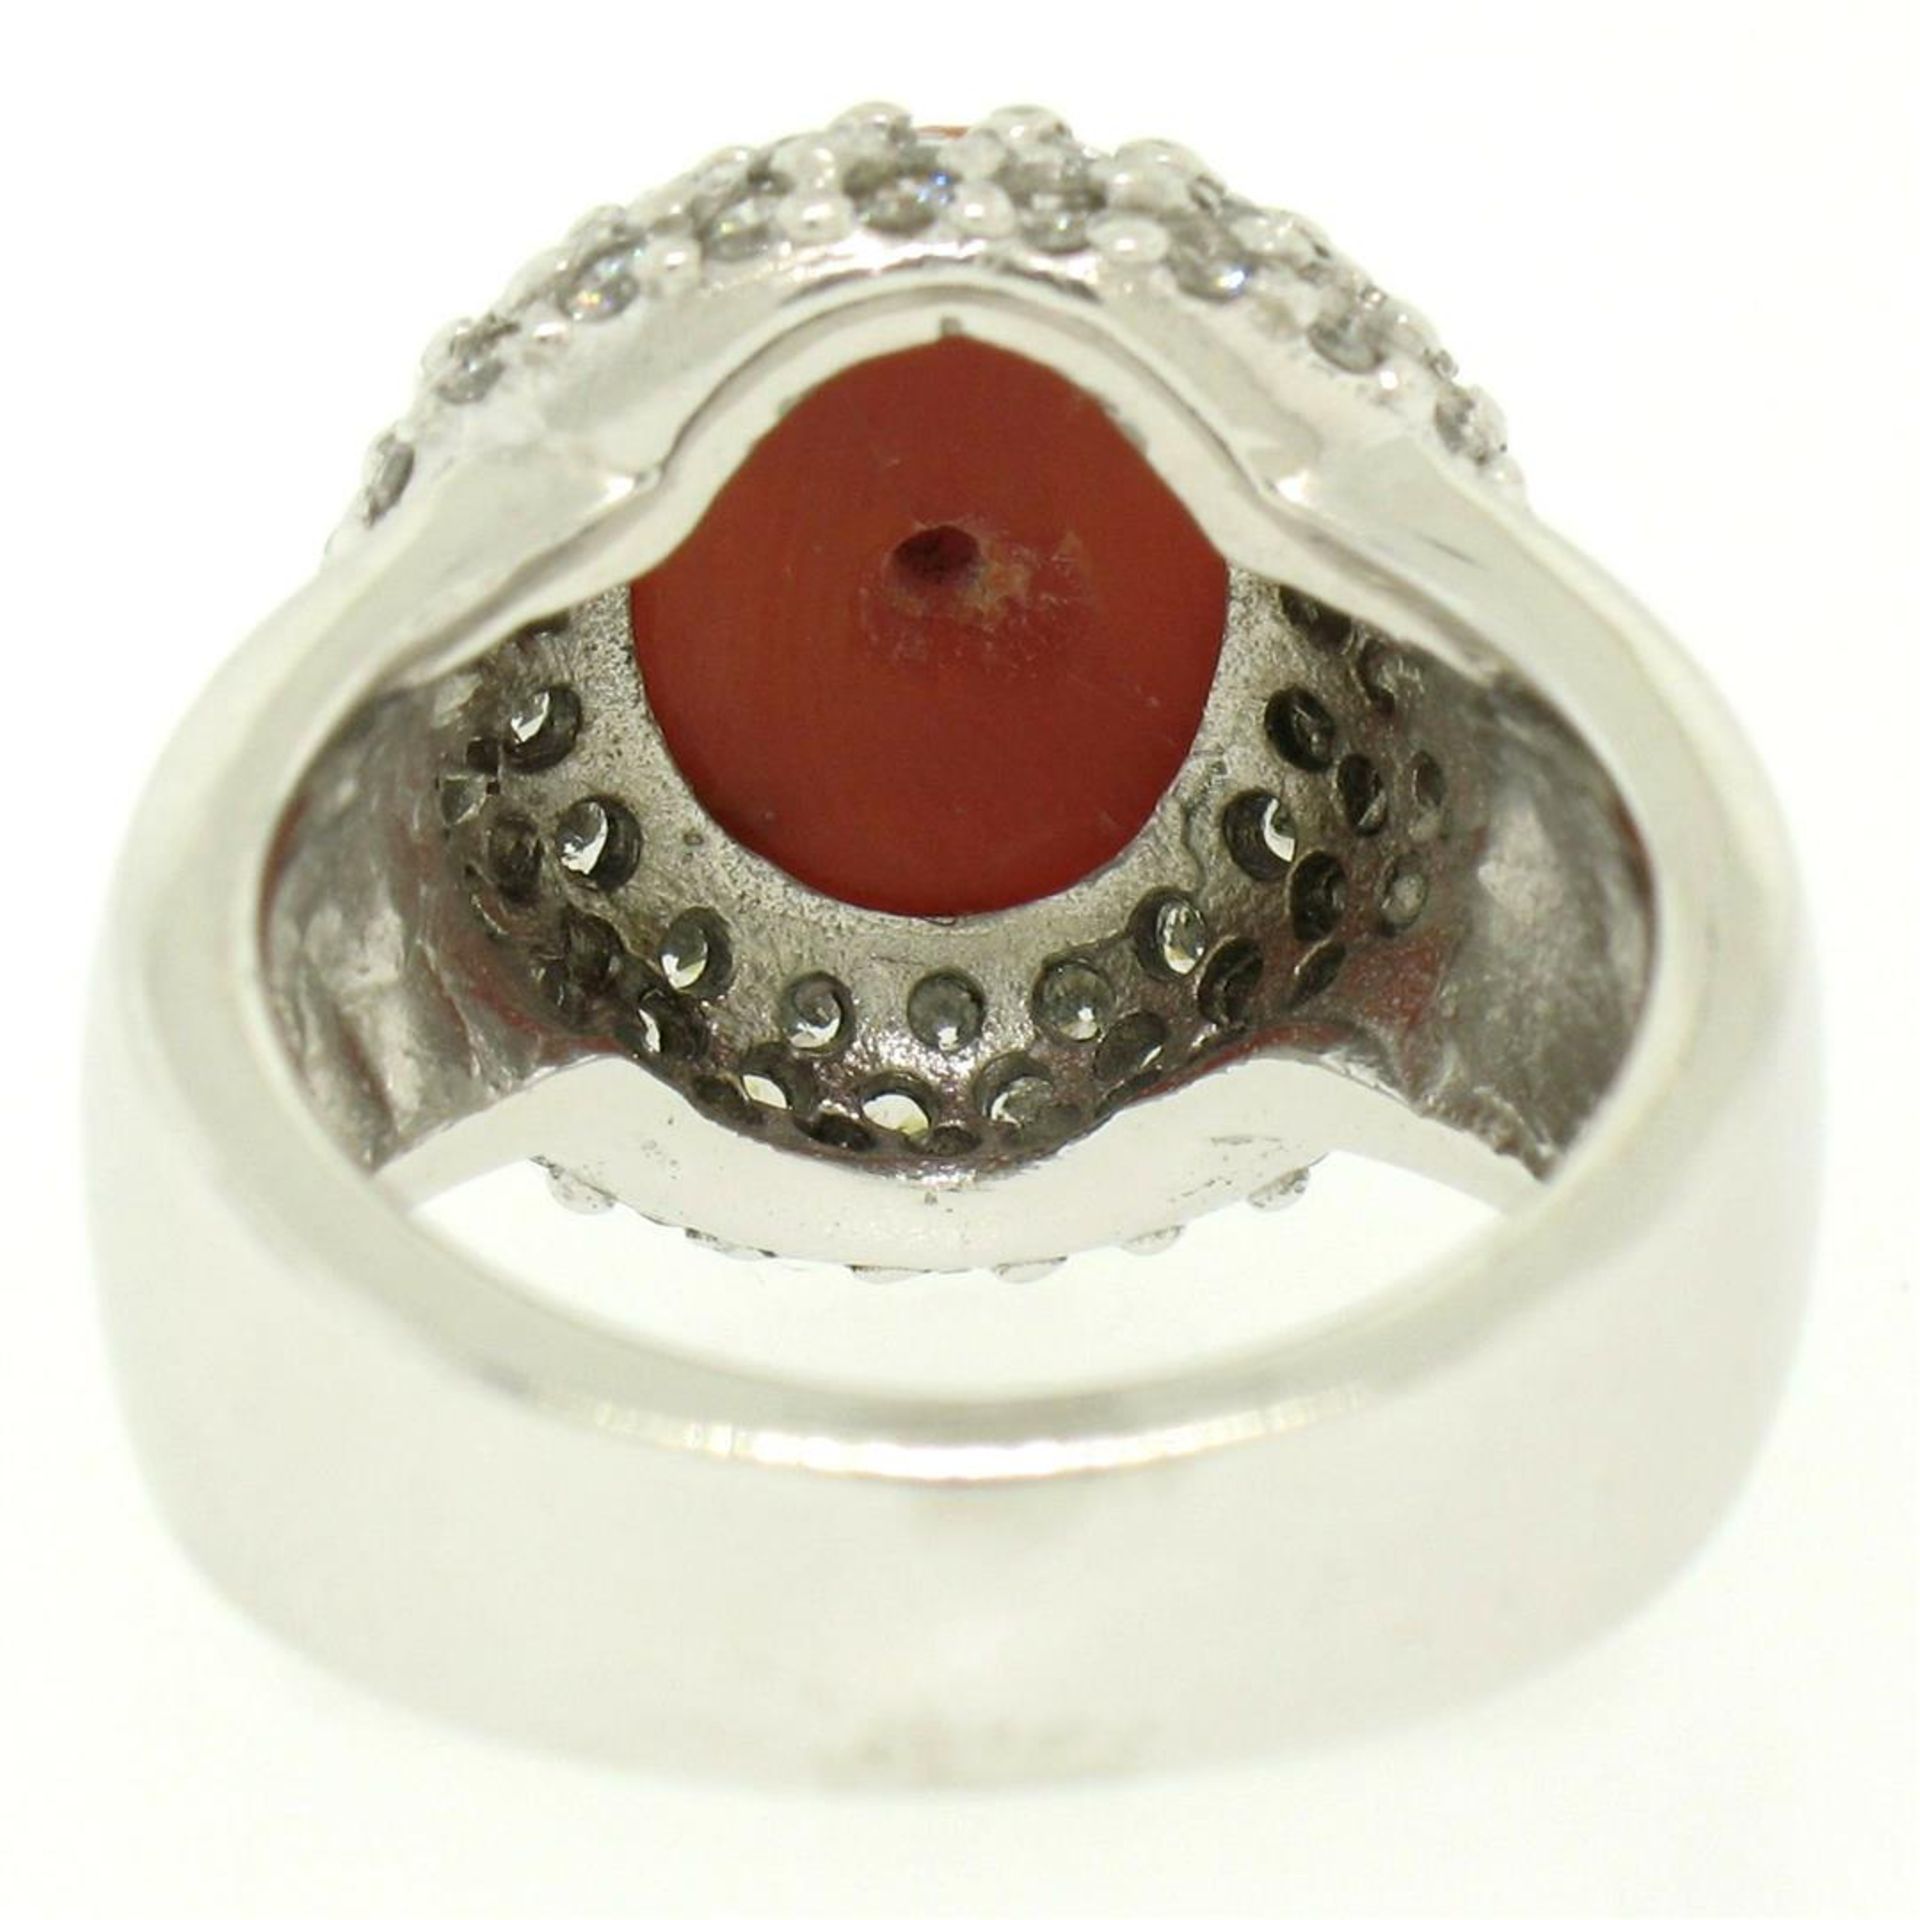 14kt White Gold Oval Cabochon Red Coral Ring w/ 2.10ctw Diamond Halo - Image 6 of 8